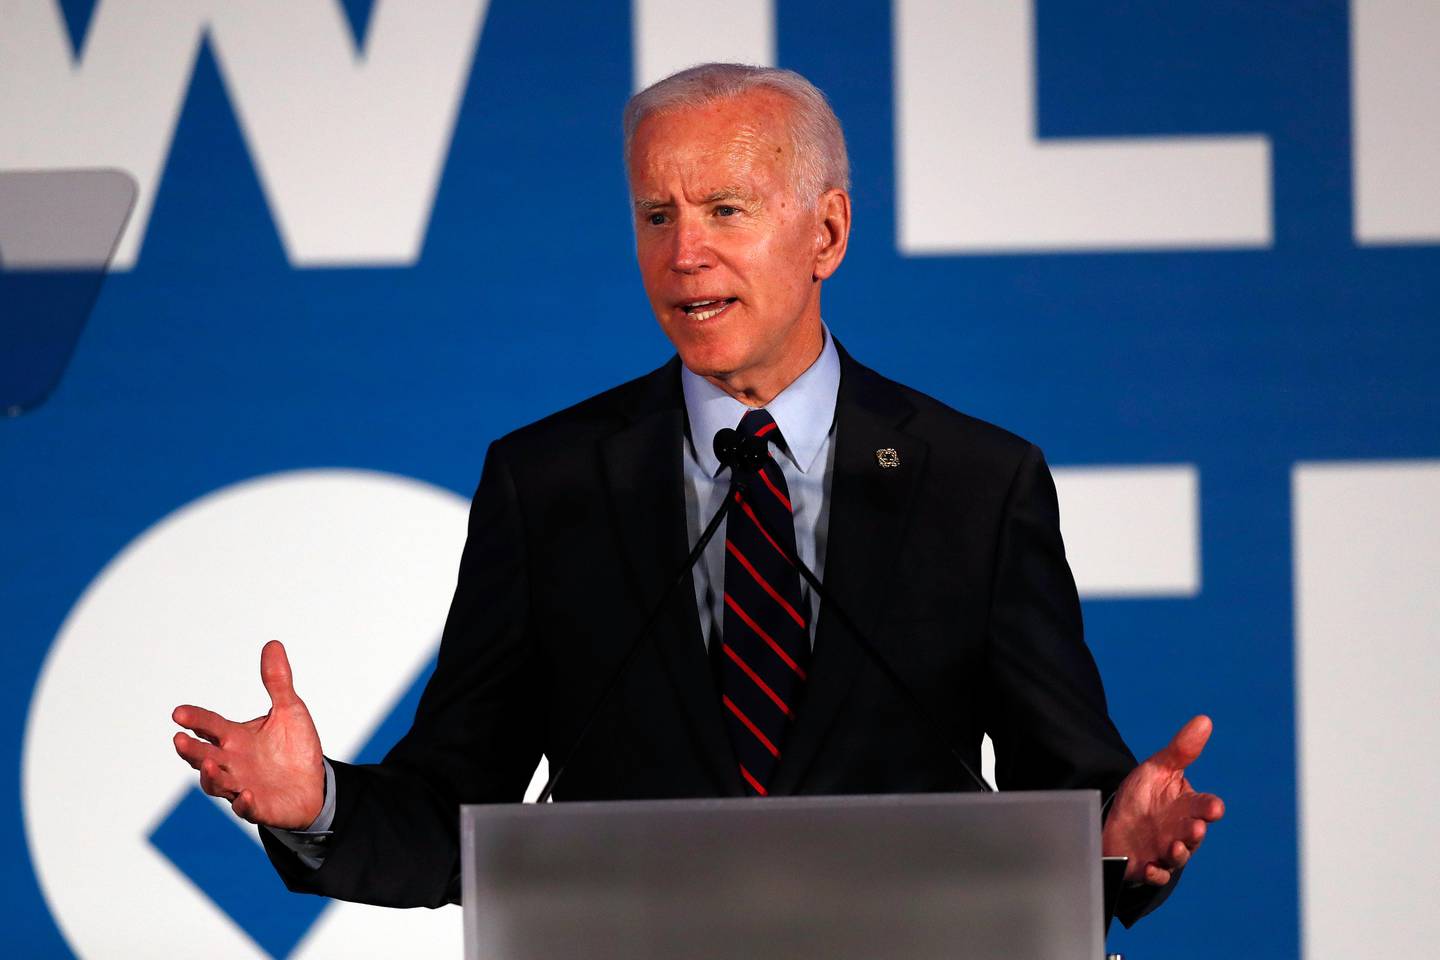 FILE - In this June 6, 2019, file photo, Democratic presidential candidate former Vice President Joe Biden speaks in Atlanta. As Democratic presidential hopefuls prepare for their first 2020 primary debate this week, 77 medical and public health groups aligned on Monday, June 24, to push for a series of consensus commitments to combat climate change _ bluntly defined by the organizations as Äúa health emergency.Äù (AP Photo/John Bazemore)